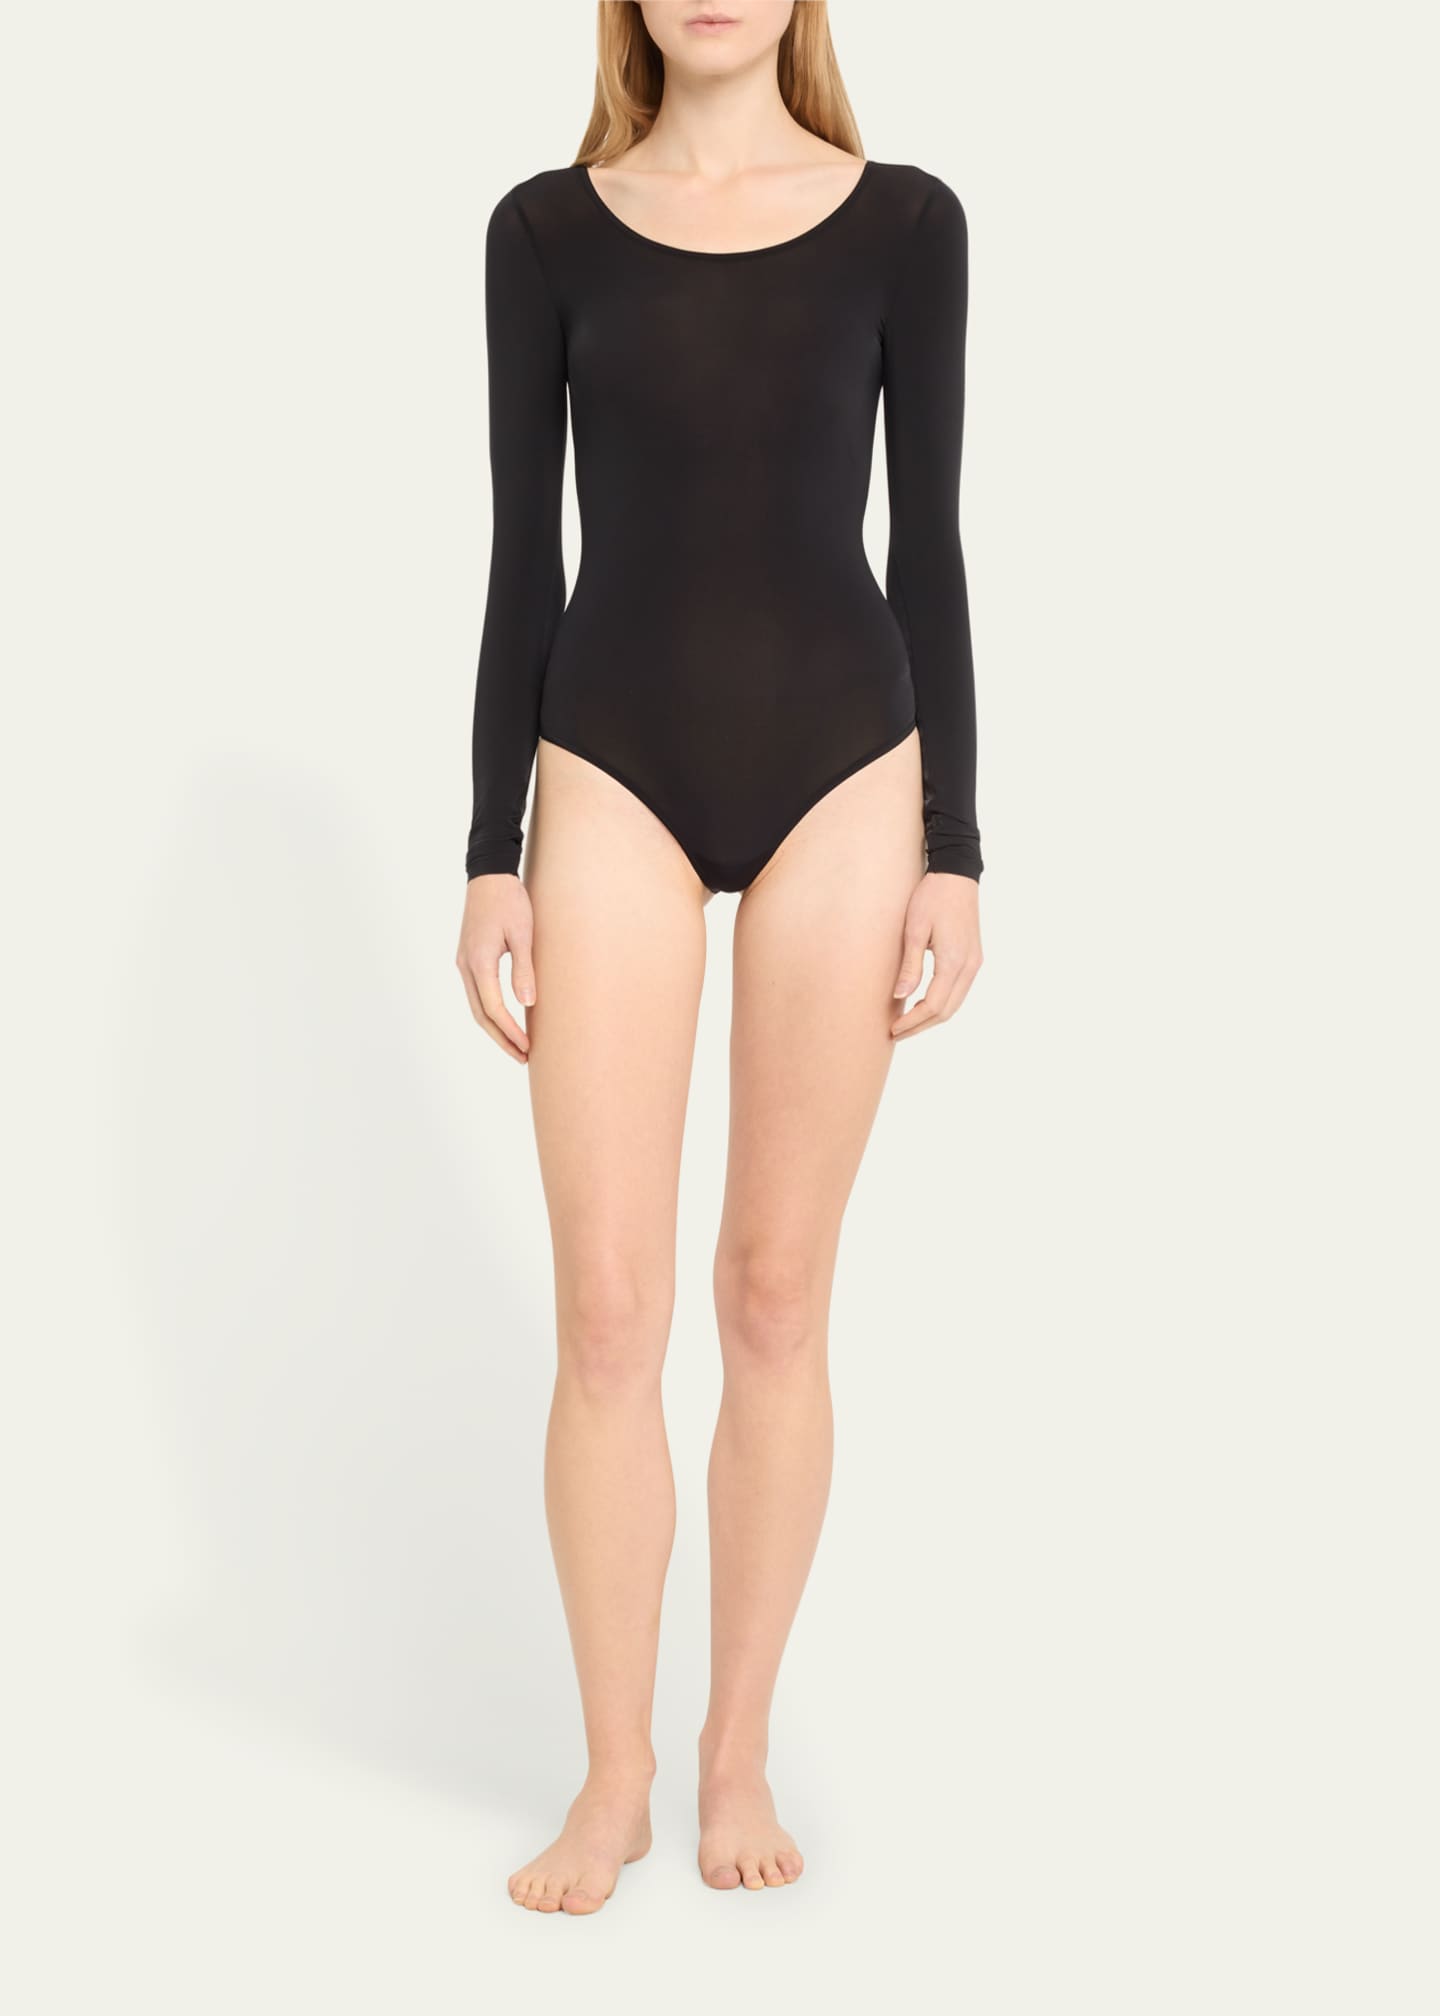 Wolford Bahamas Seamless Half Sleeve Bodysuit in BLACK Size Large L11412